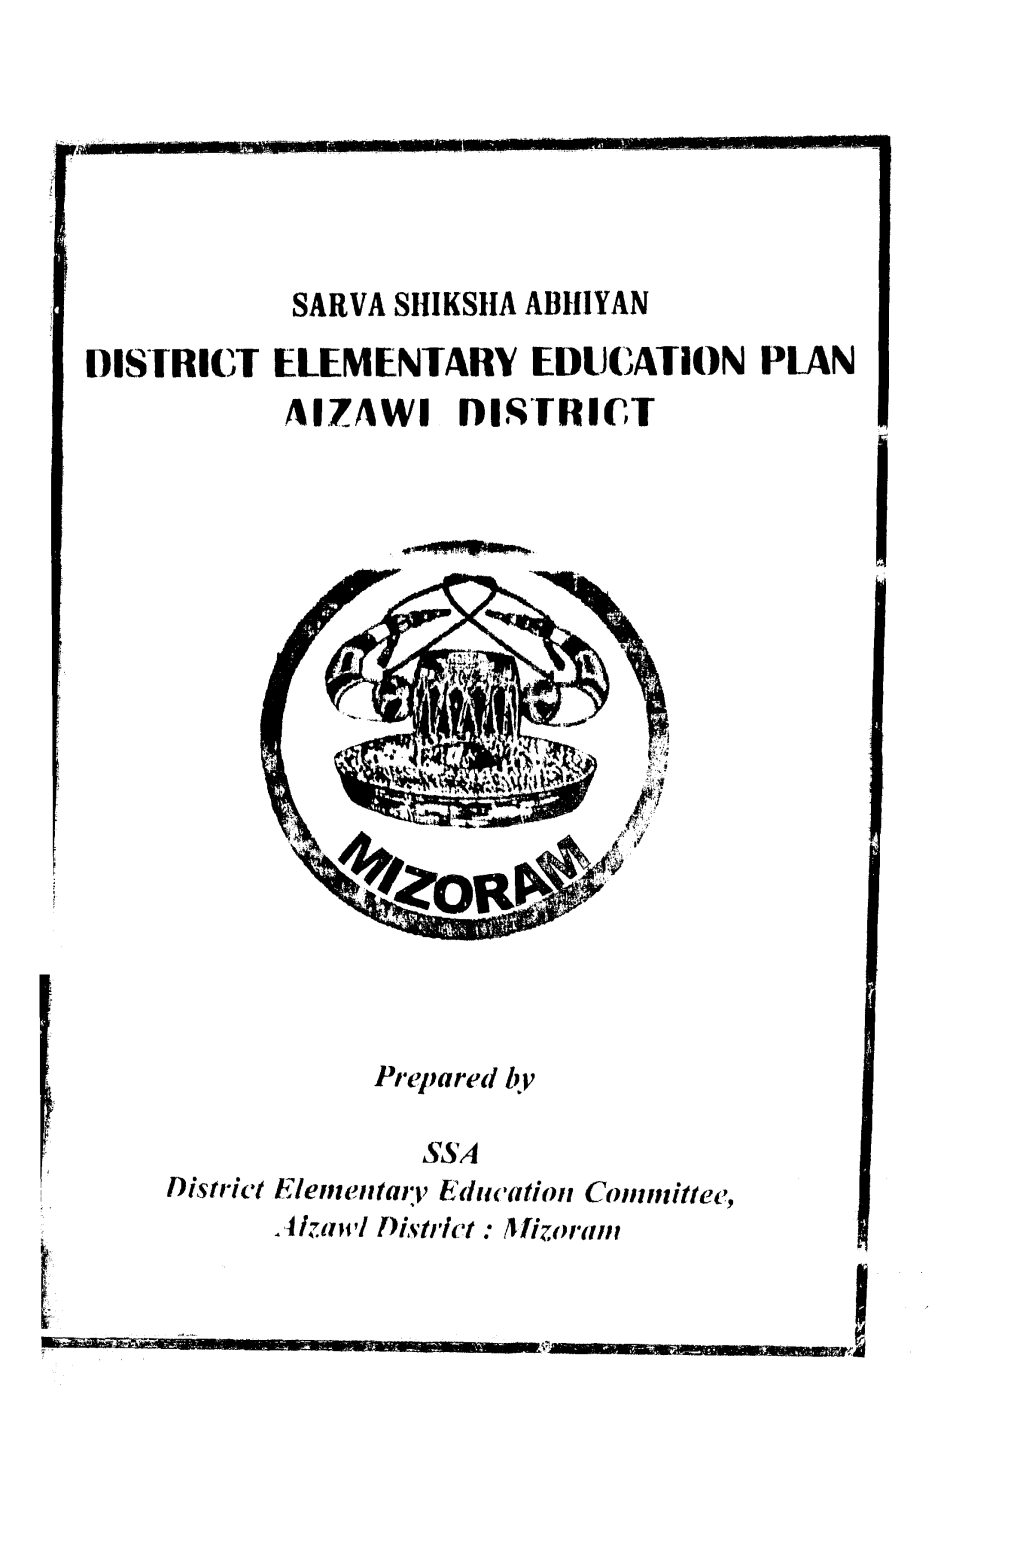 Prepared by SSA District Elementary Education Committee, Aizawi District: Mizoram COIMEINTS